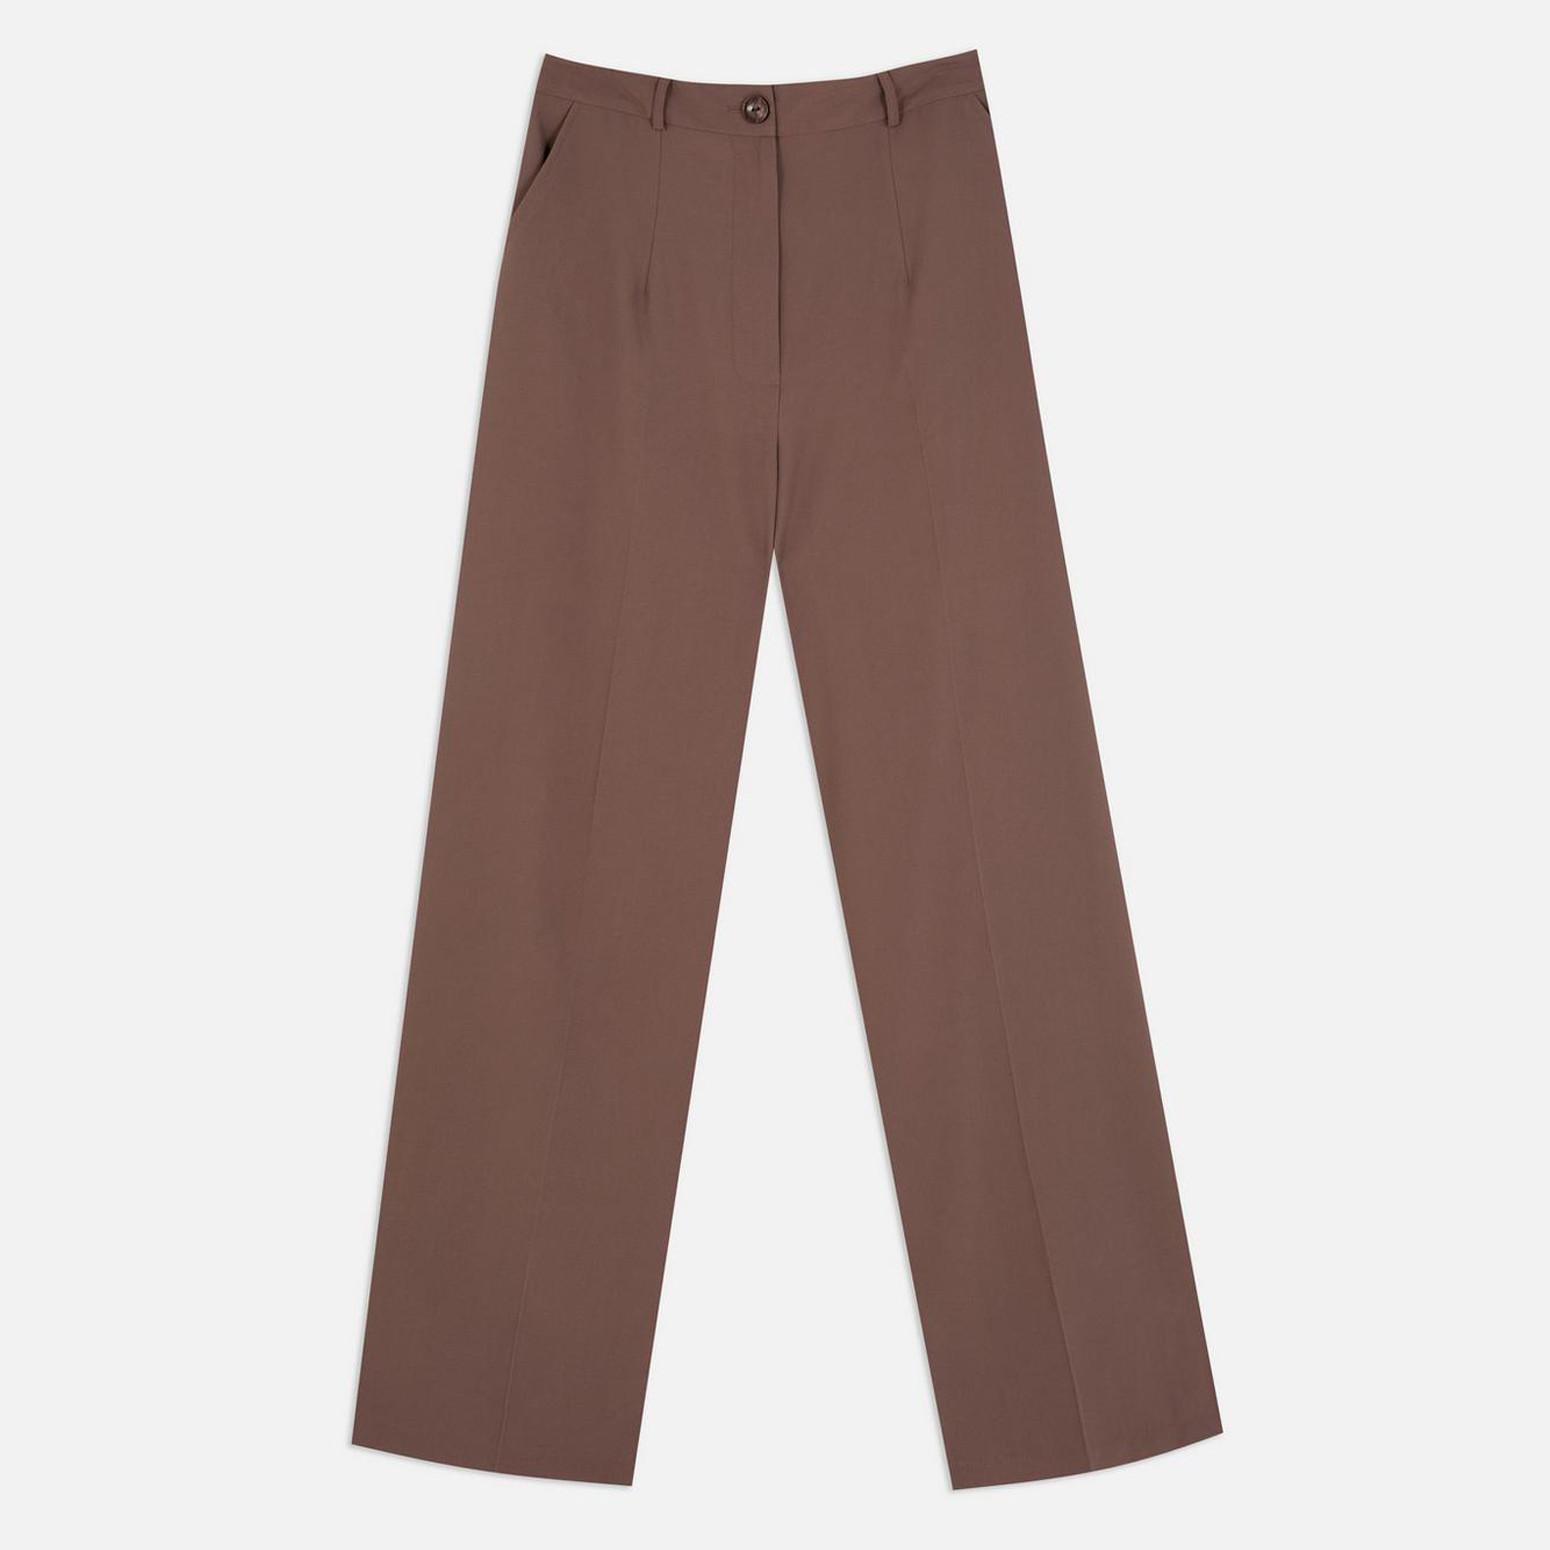 Womens tailored trousers